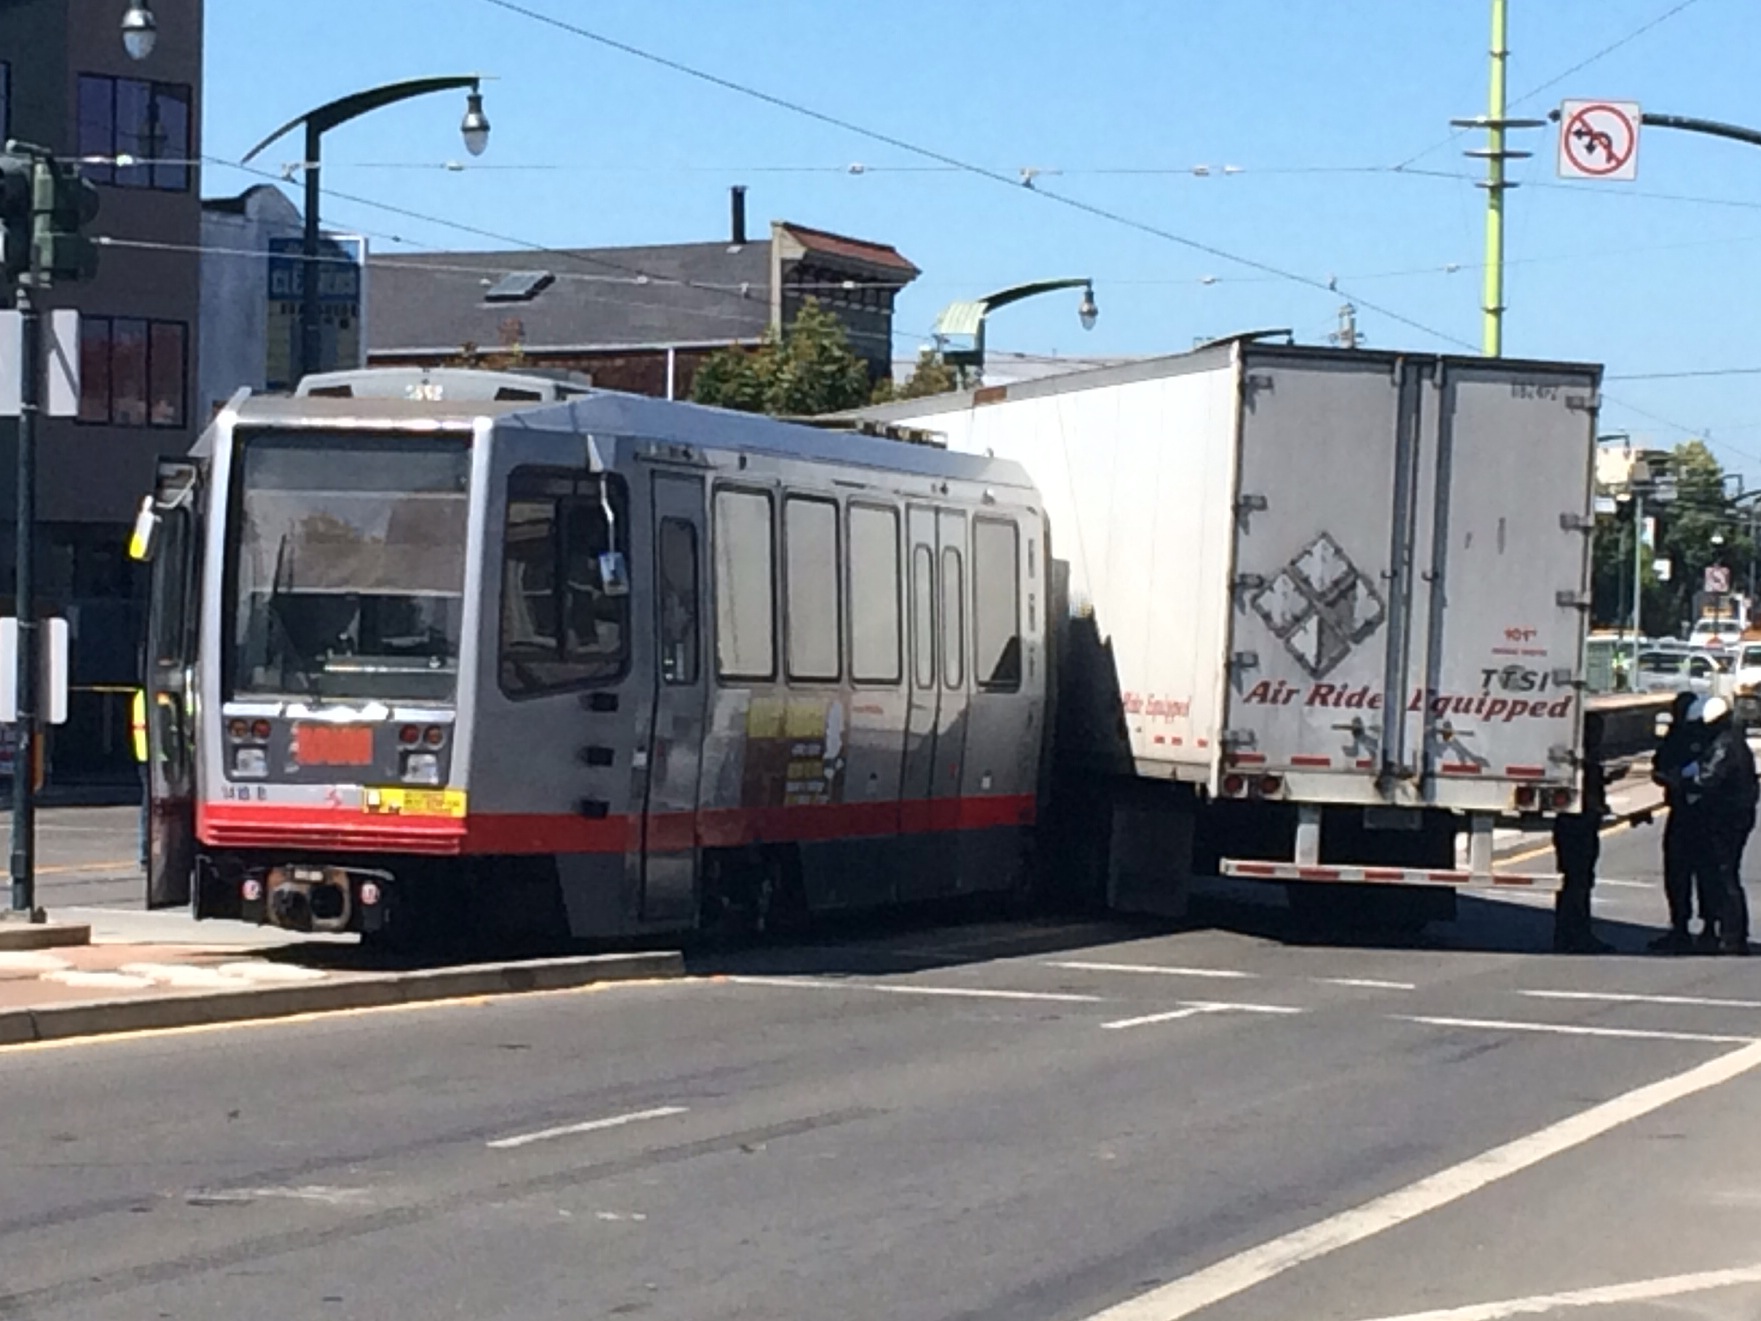 Scene of a collision between a Muni light rail vehicle and a big rig on Third St. and Innes Ave. in San Francisco, August 1, 2014. (CBS)